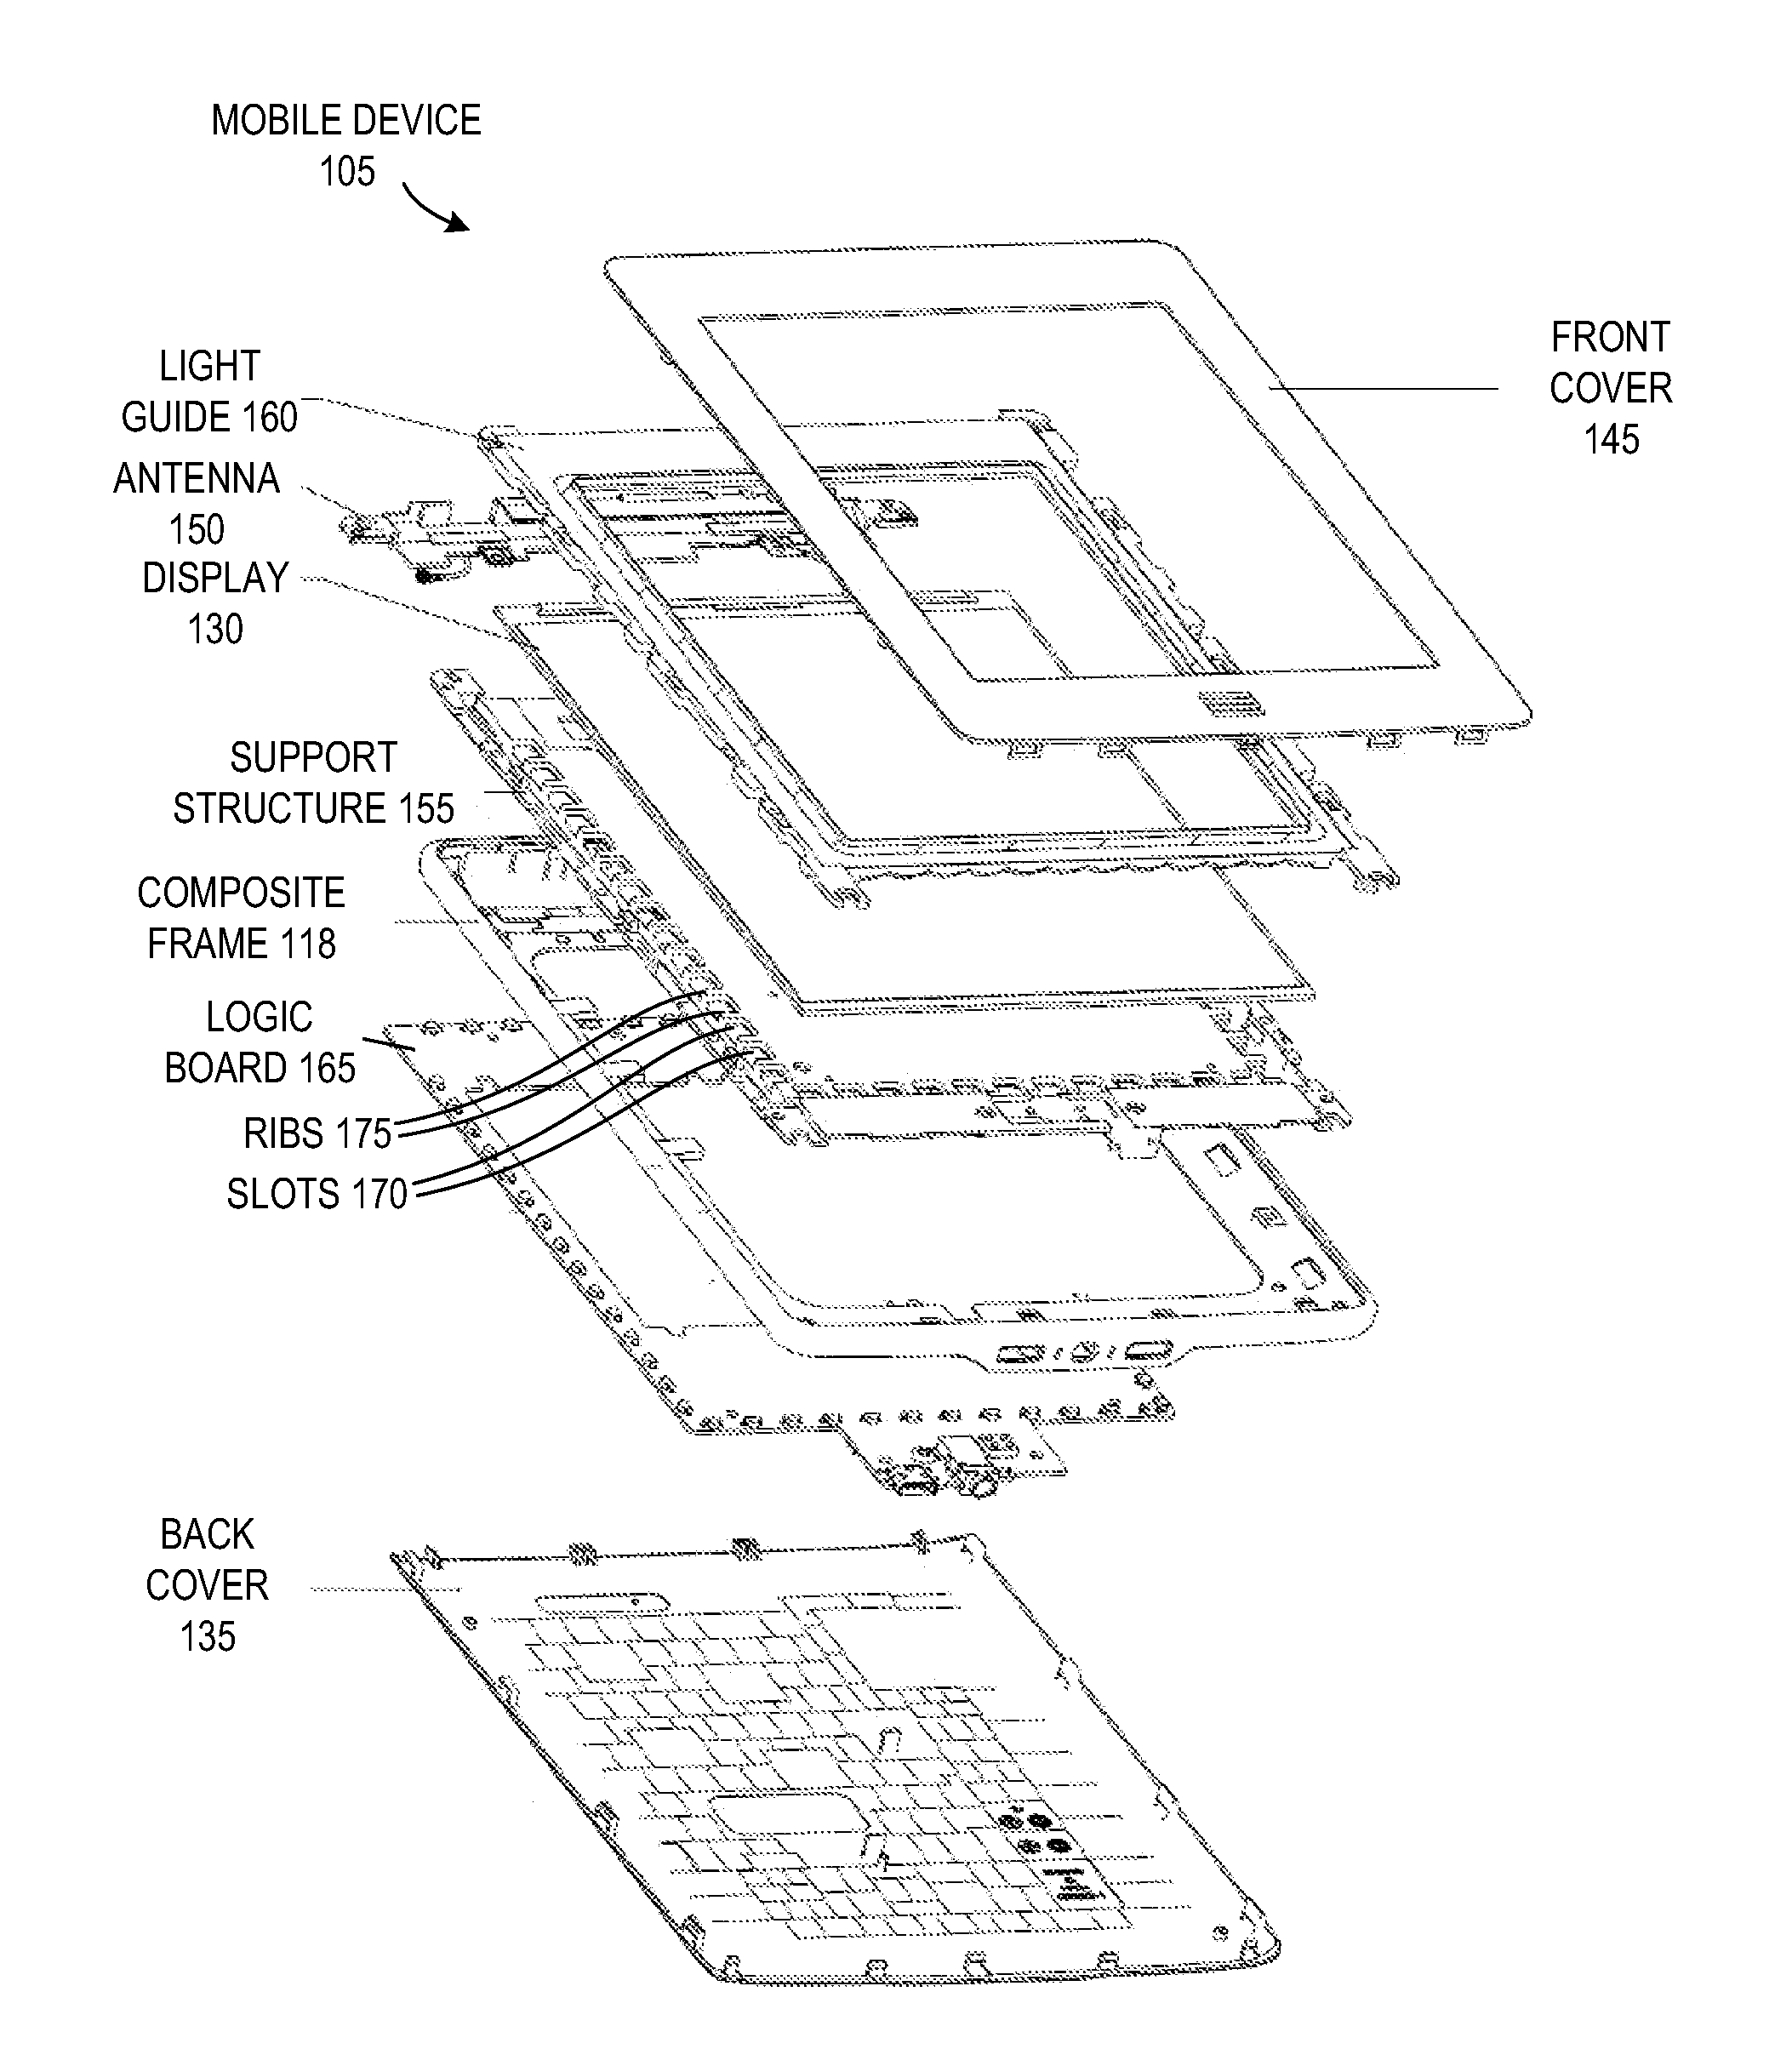 Internal metal support structure for mobile device